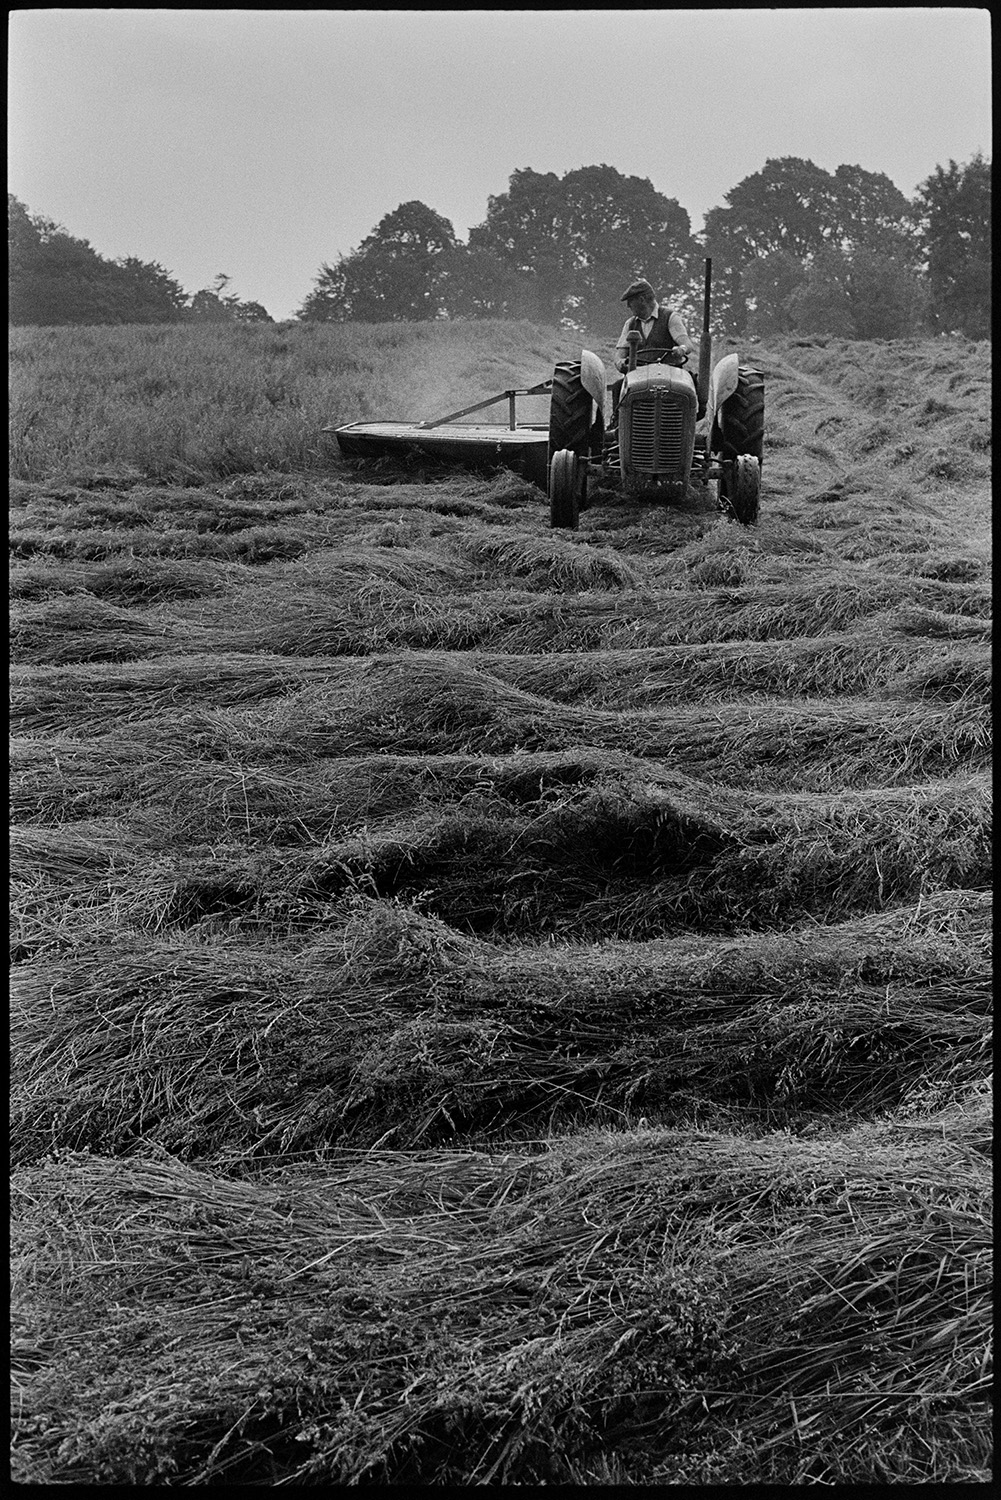 Cutting grass. 
[John Ward mowing a field with a grass cutter and tractor at Parsonage, Iddesleigh. He is looking behind to check the cutter.]